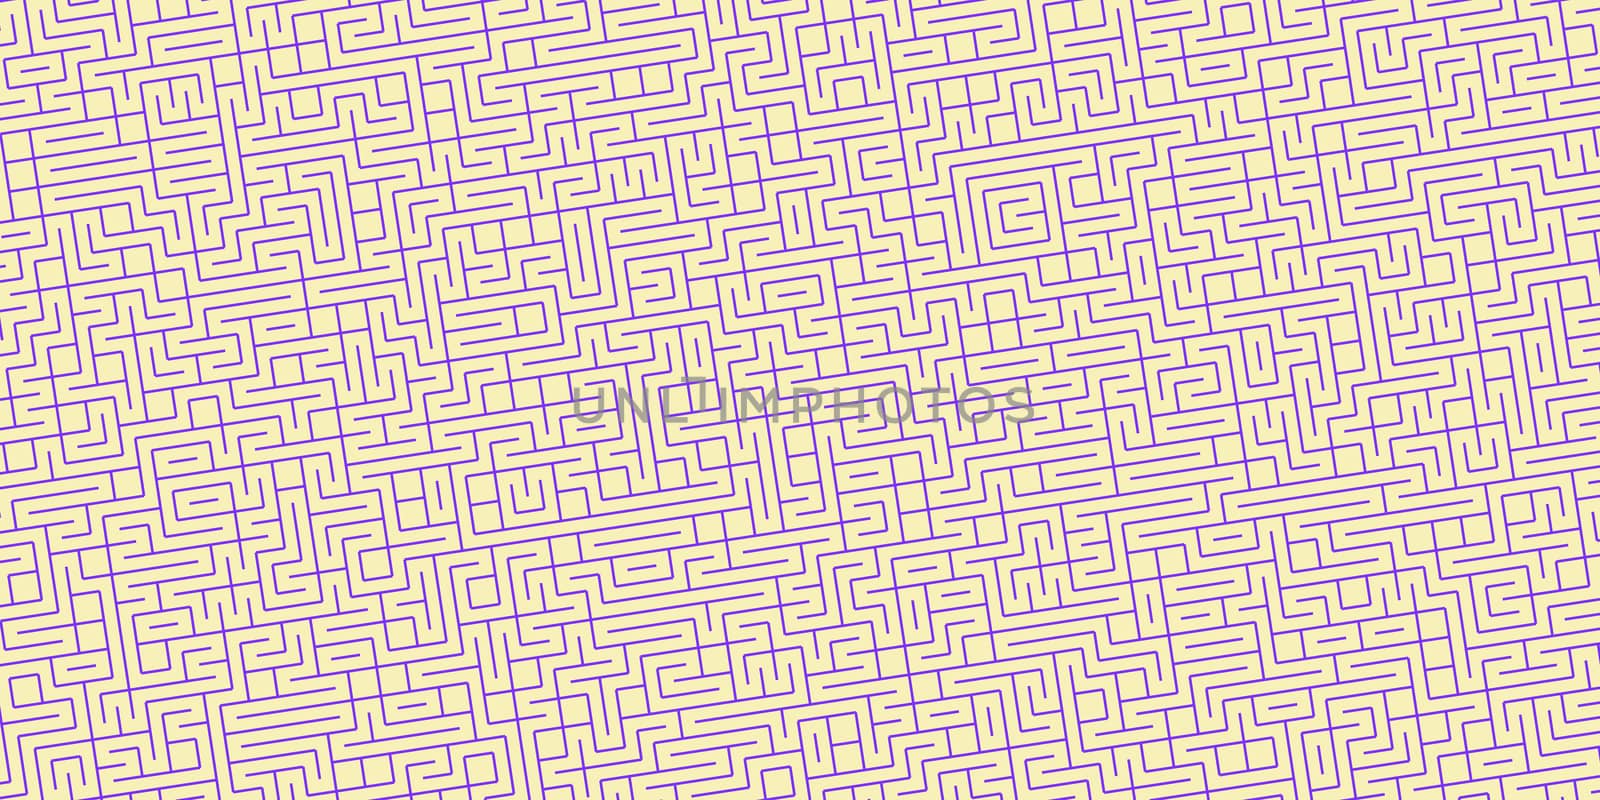 Light Yellow Violet Seamless Outline Labyrinth Background. Maze Path Puzzle Concept. Difficulty Logical Mind Creativity Abstraction. by sanches812